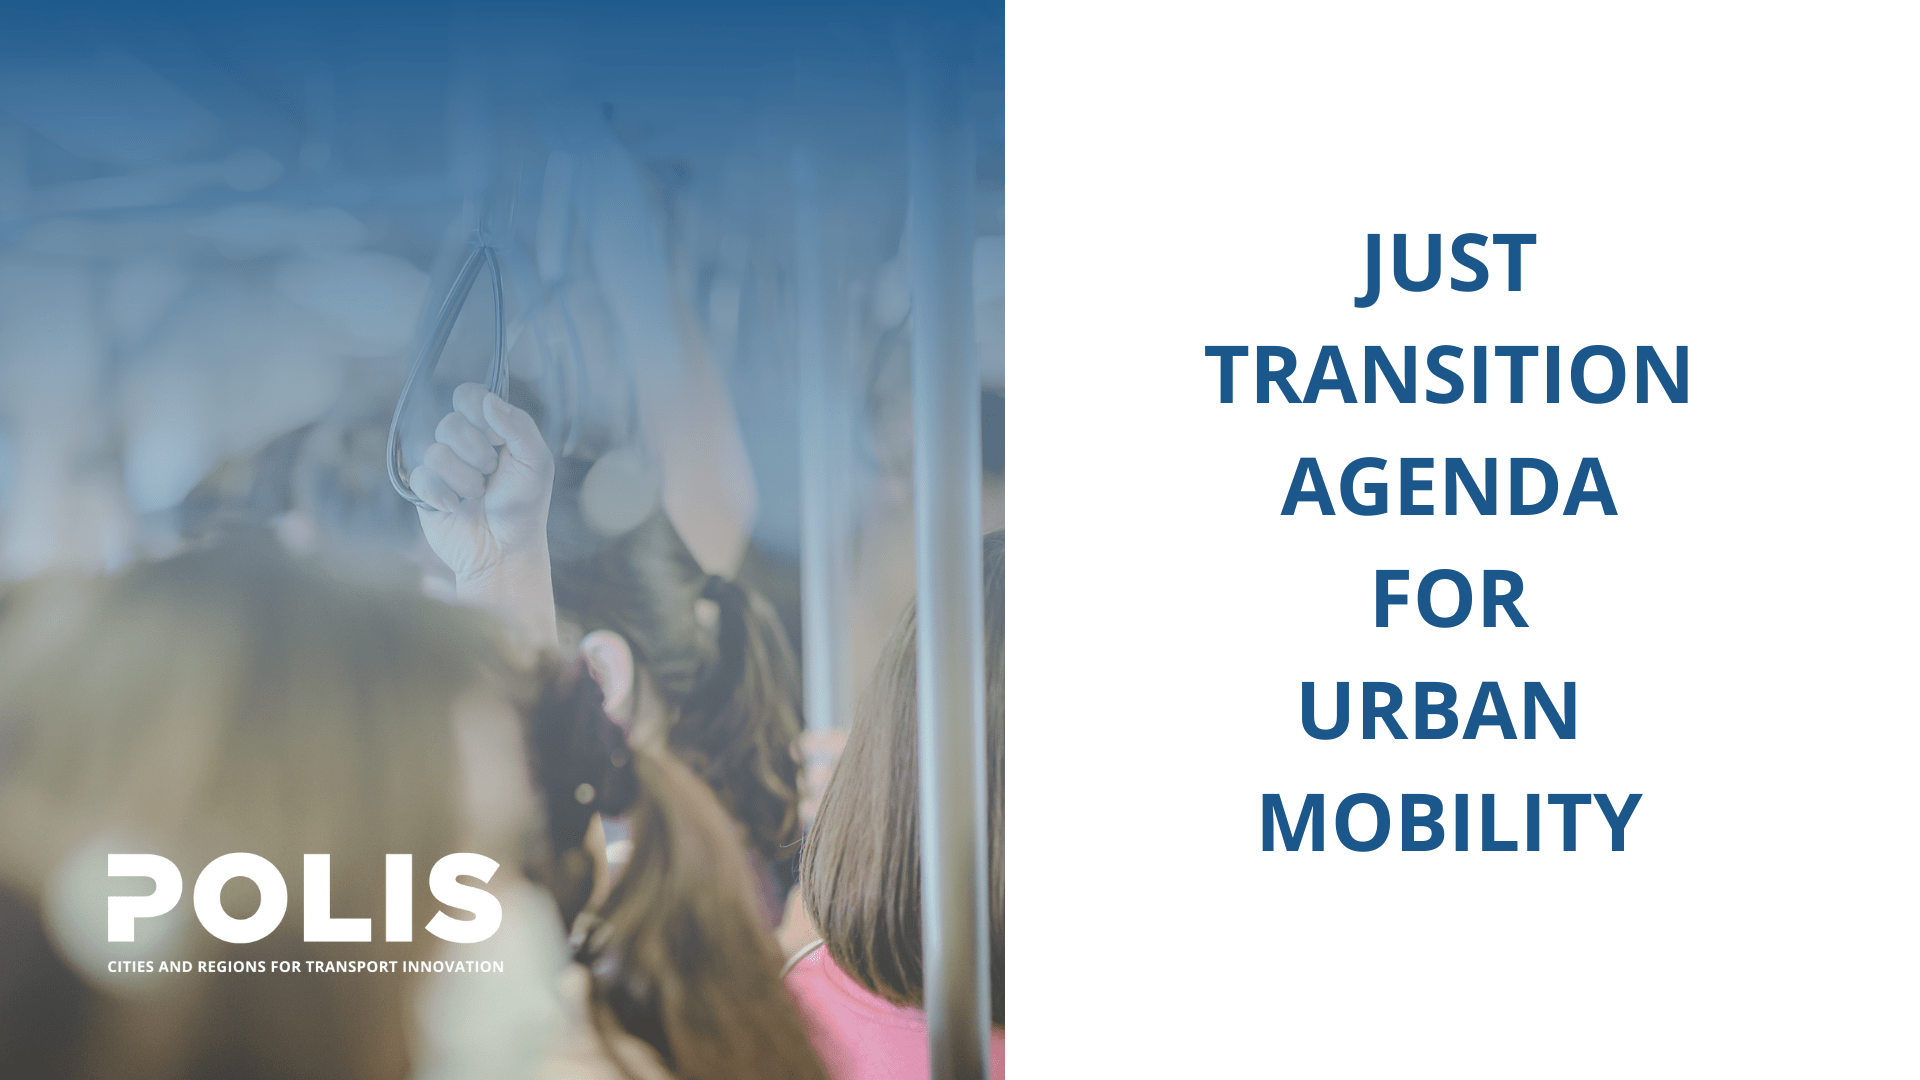 Just Transition Agenda for Urban Mobility